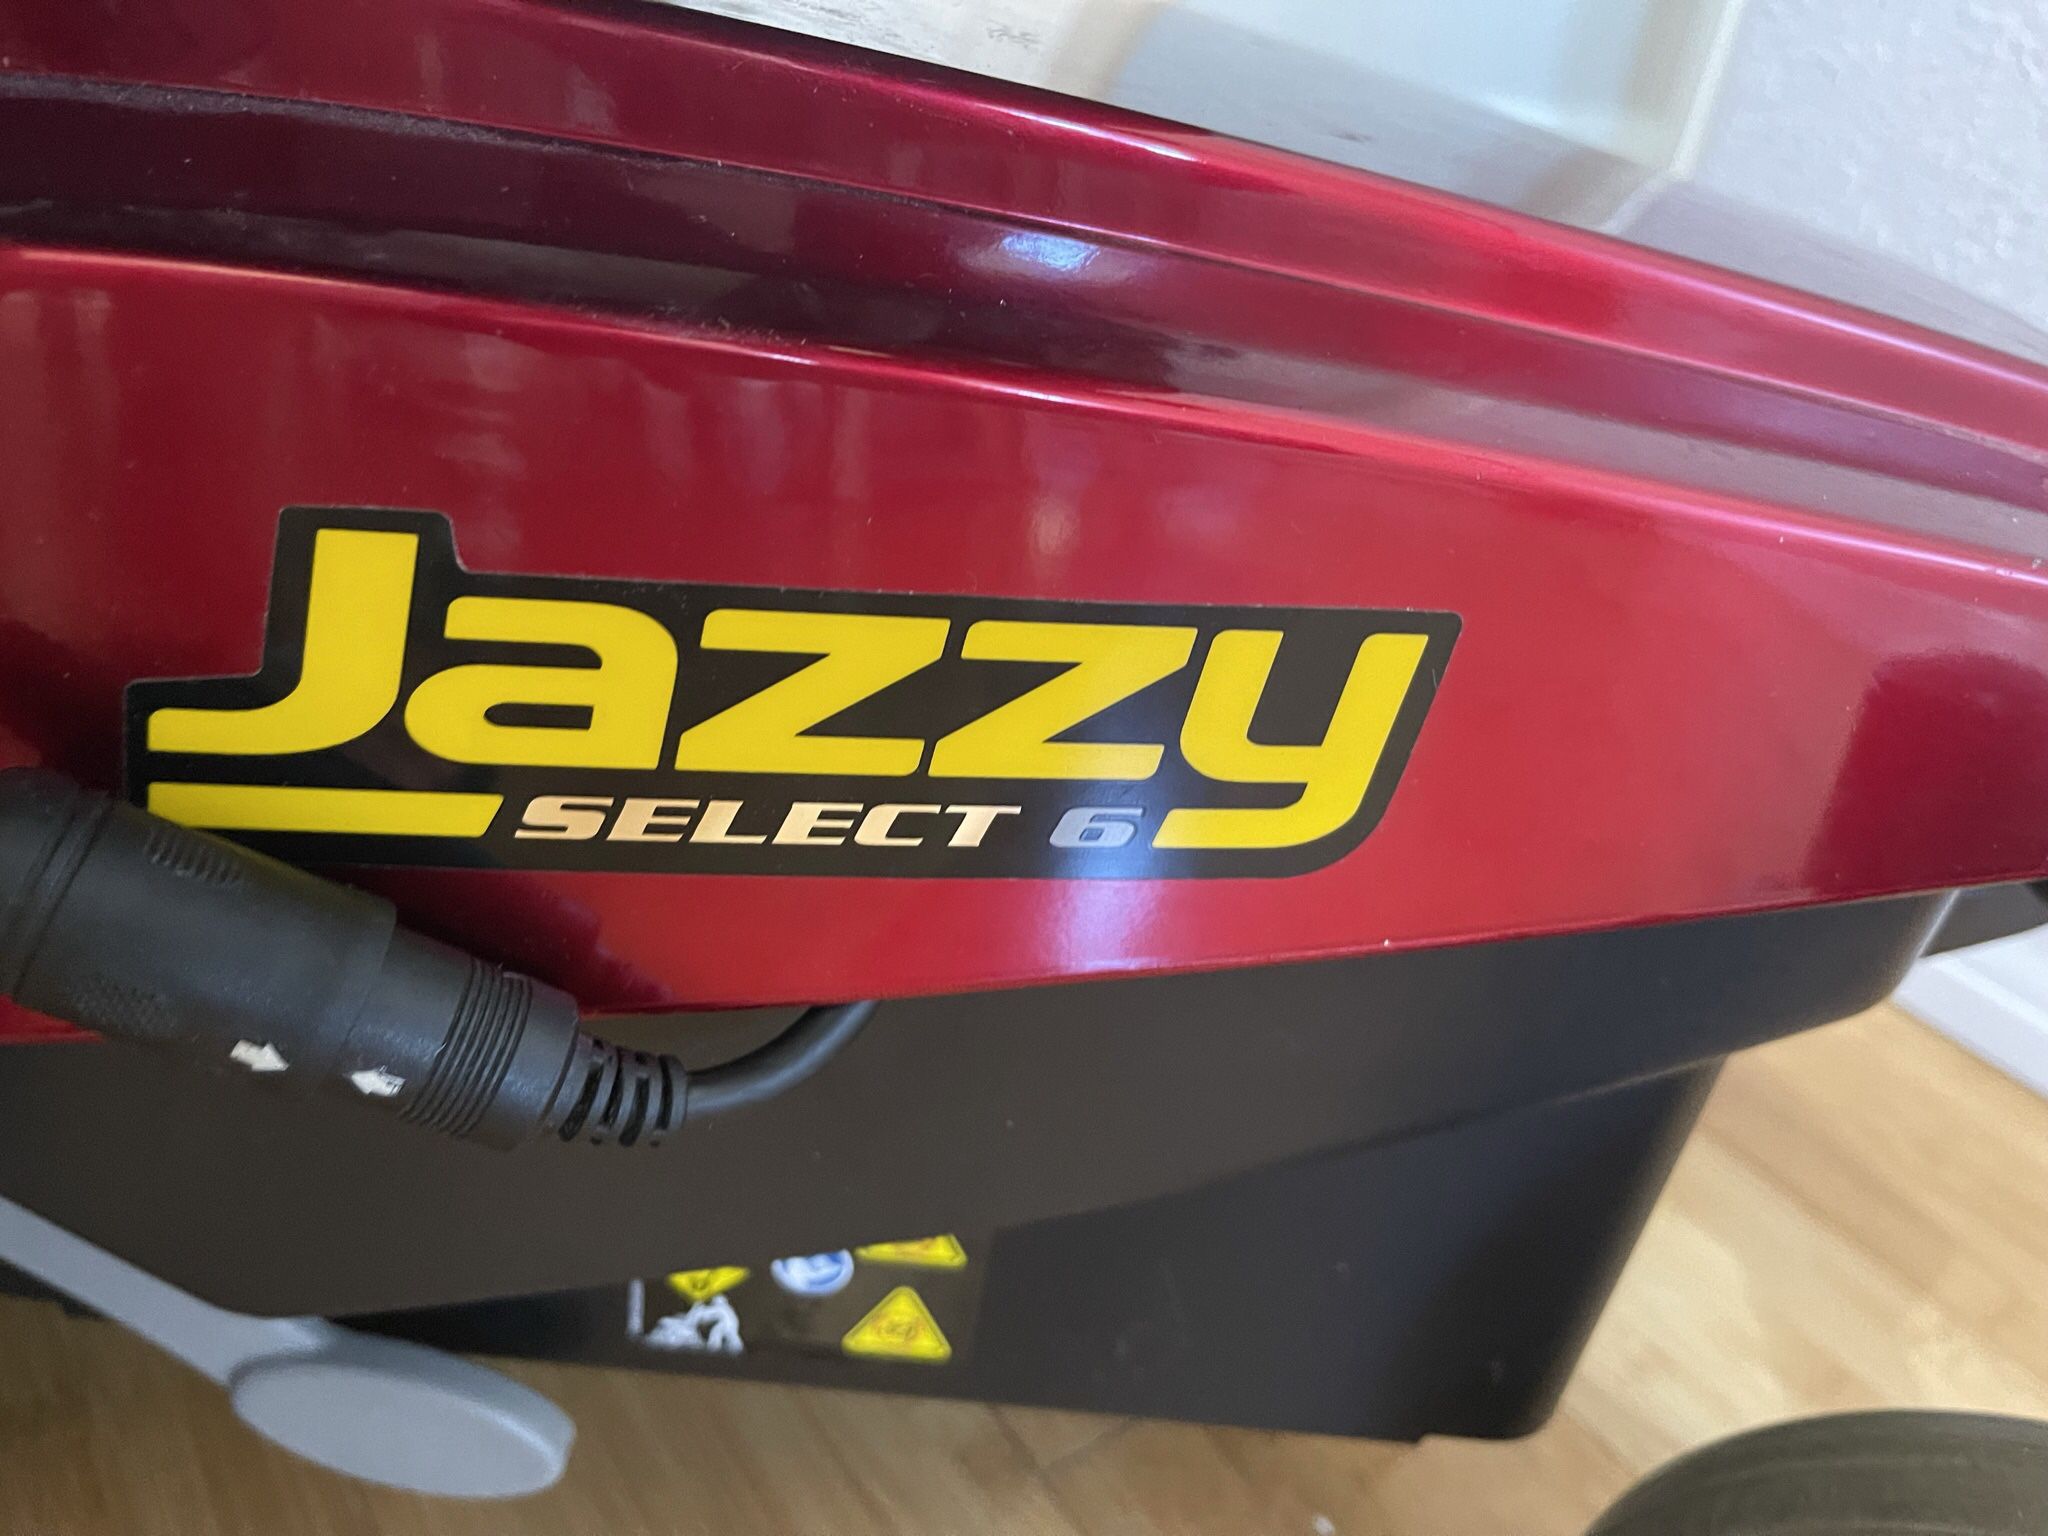 Like New Jazzy Select 6 Pride Mobility Scooter 